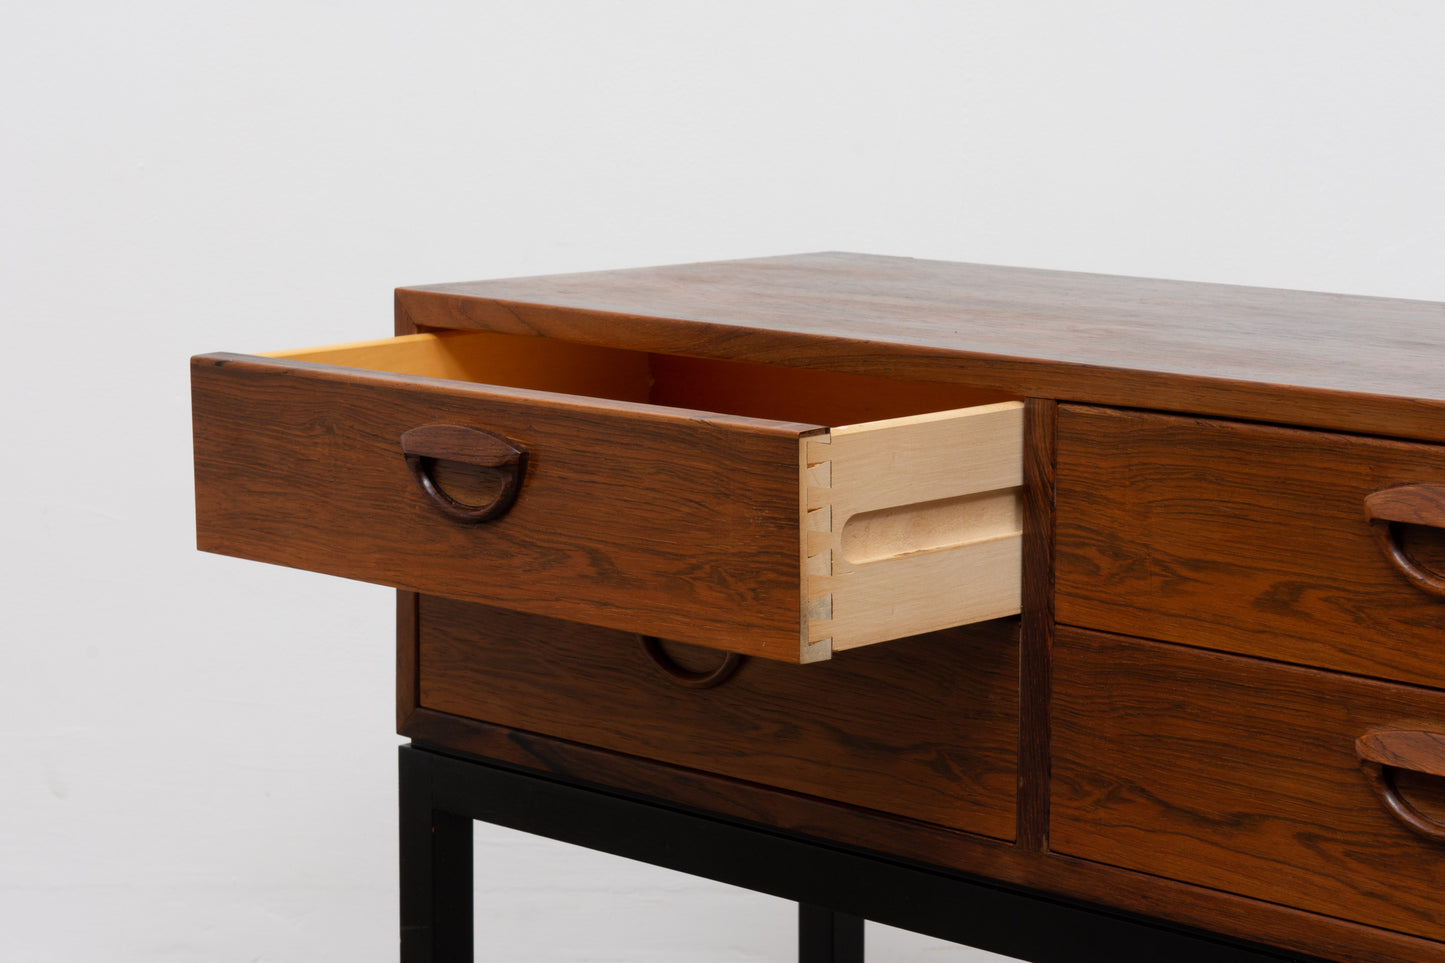 1960s low rosewood chest by Kai Kristiansen